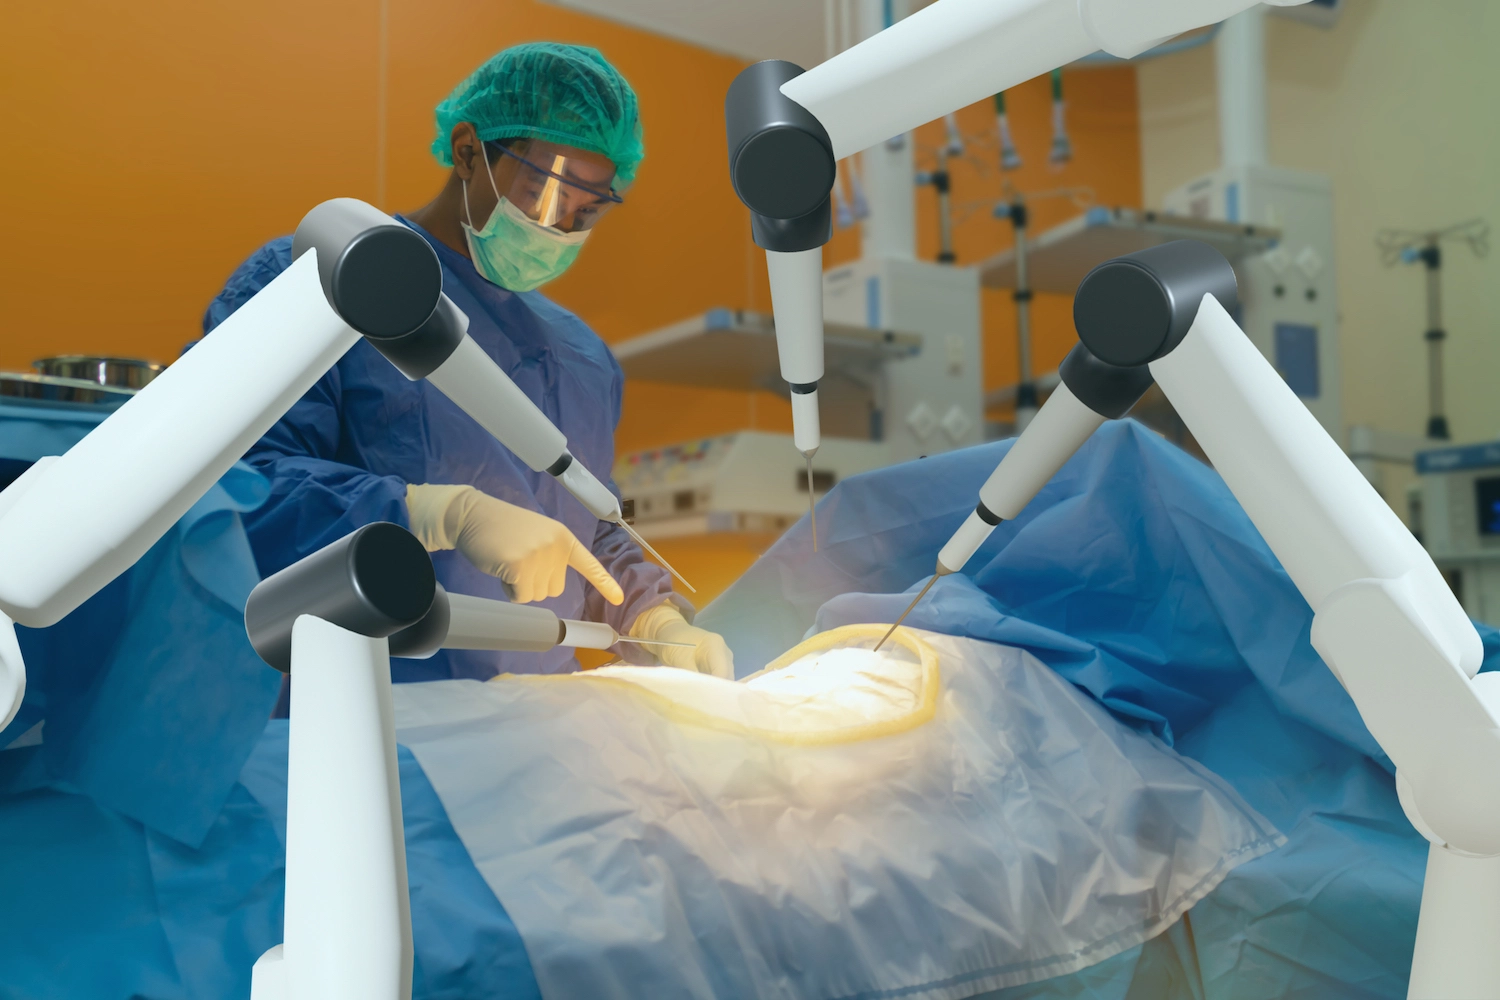 Robot performing surgery with a surgeon